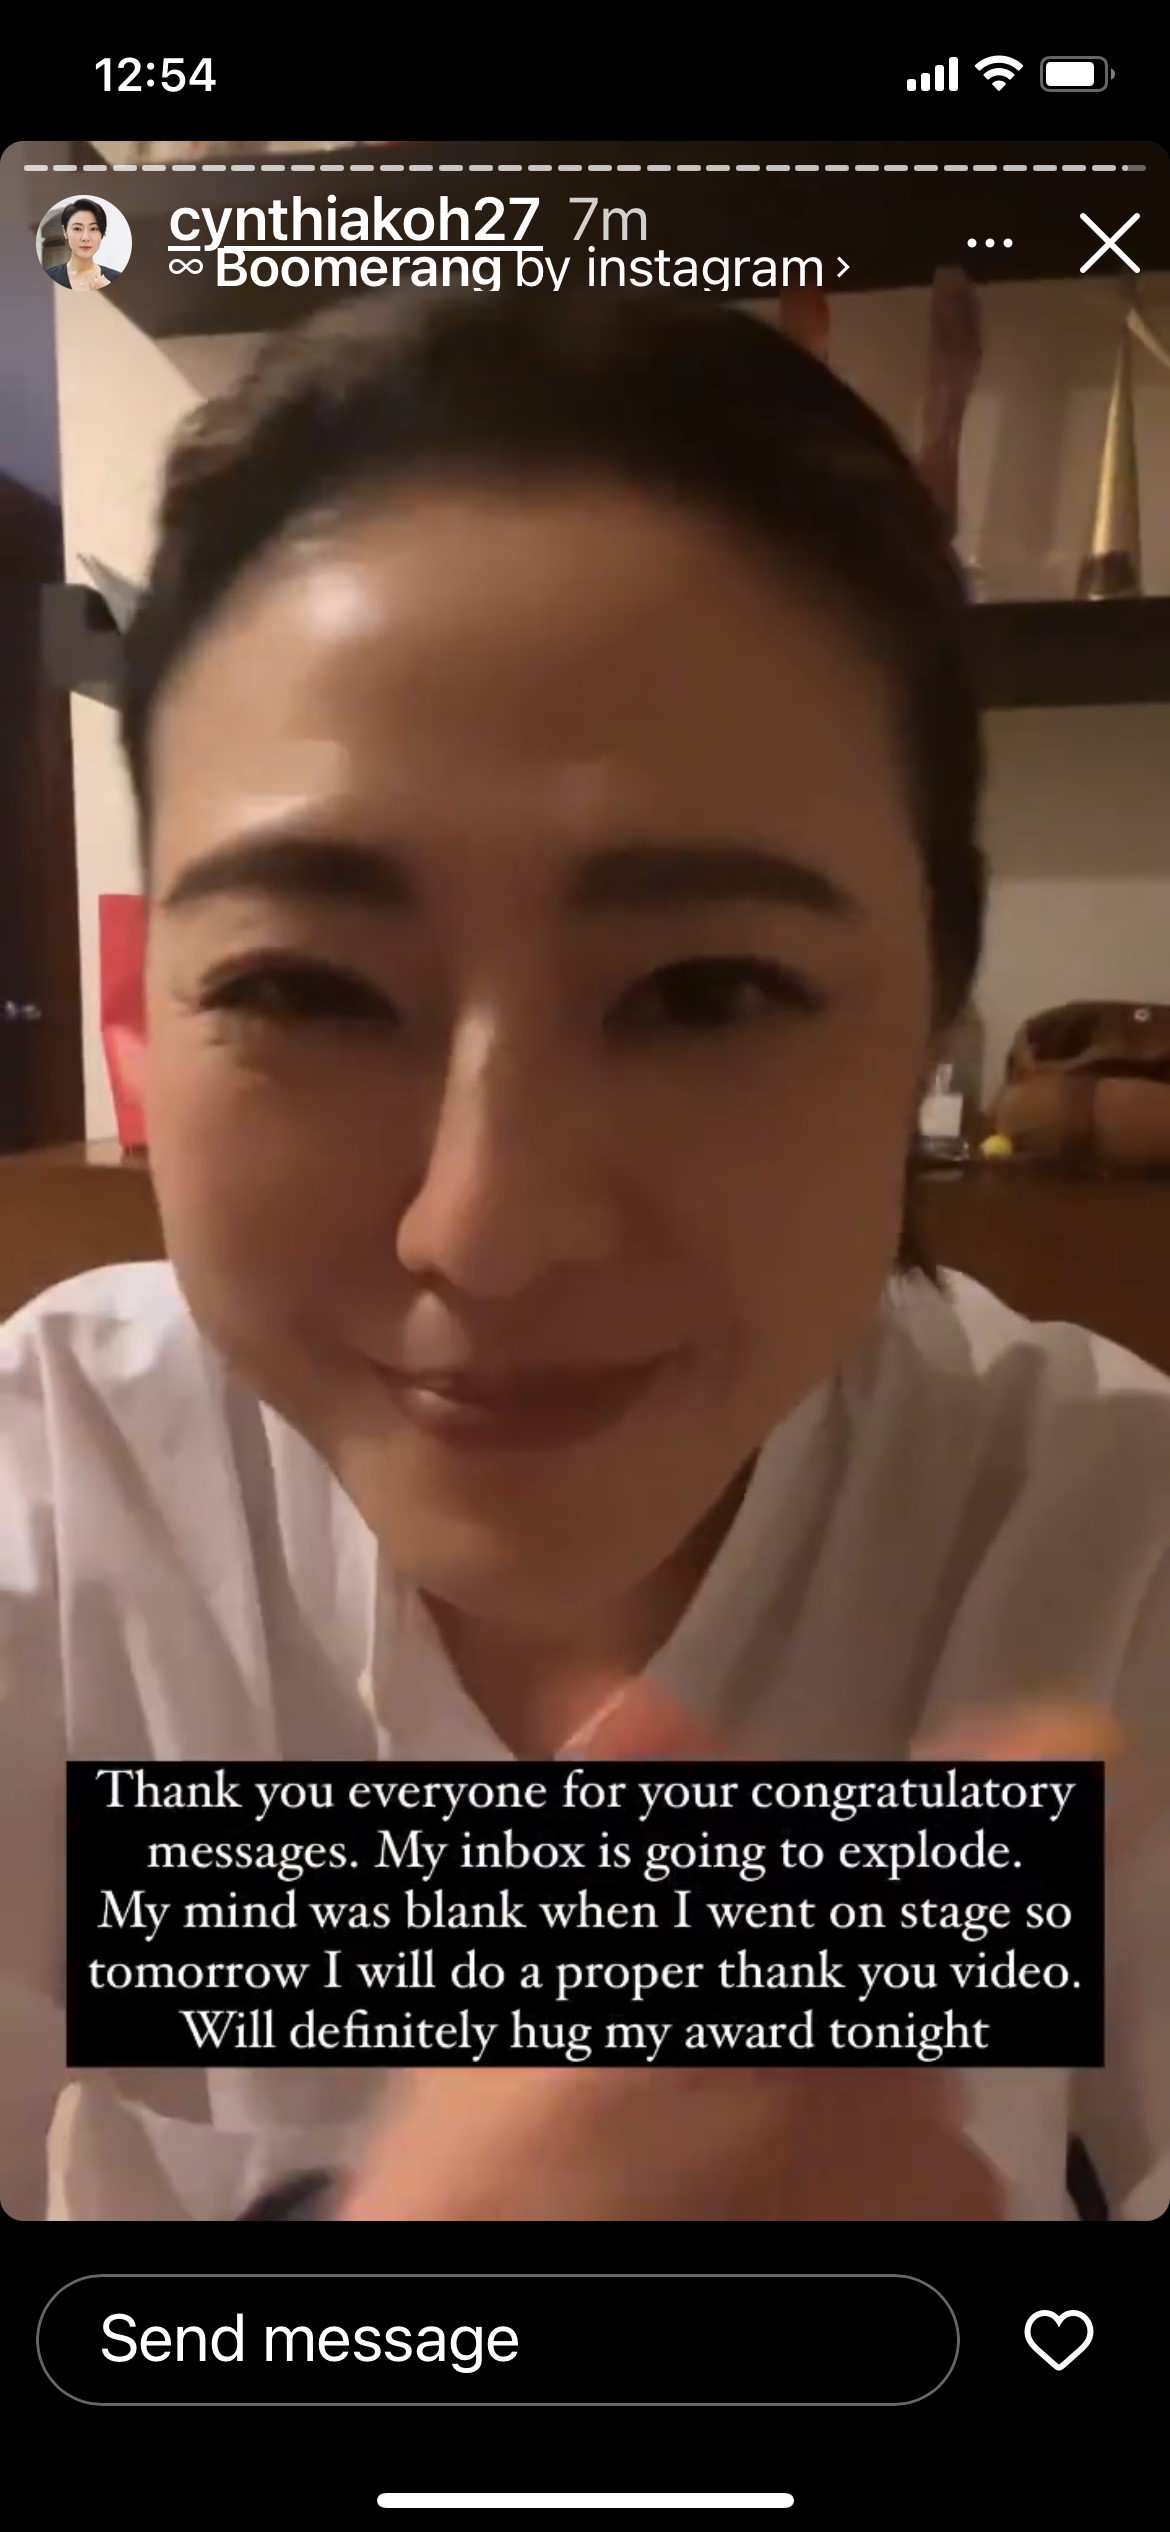 Cynthia Koh shares her Star Awards news with her fans via Instagram Story